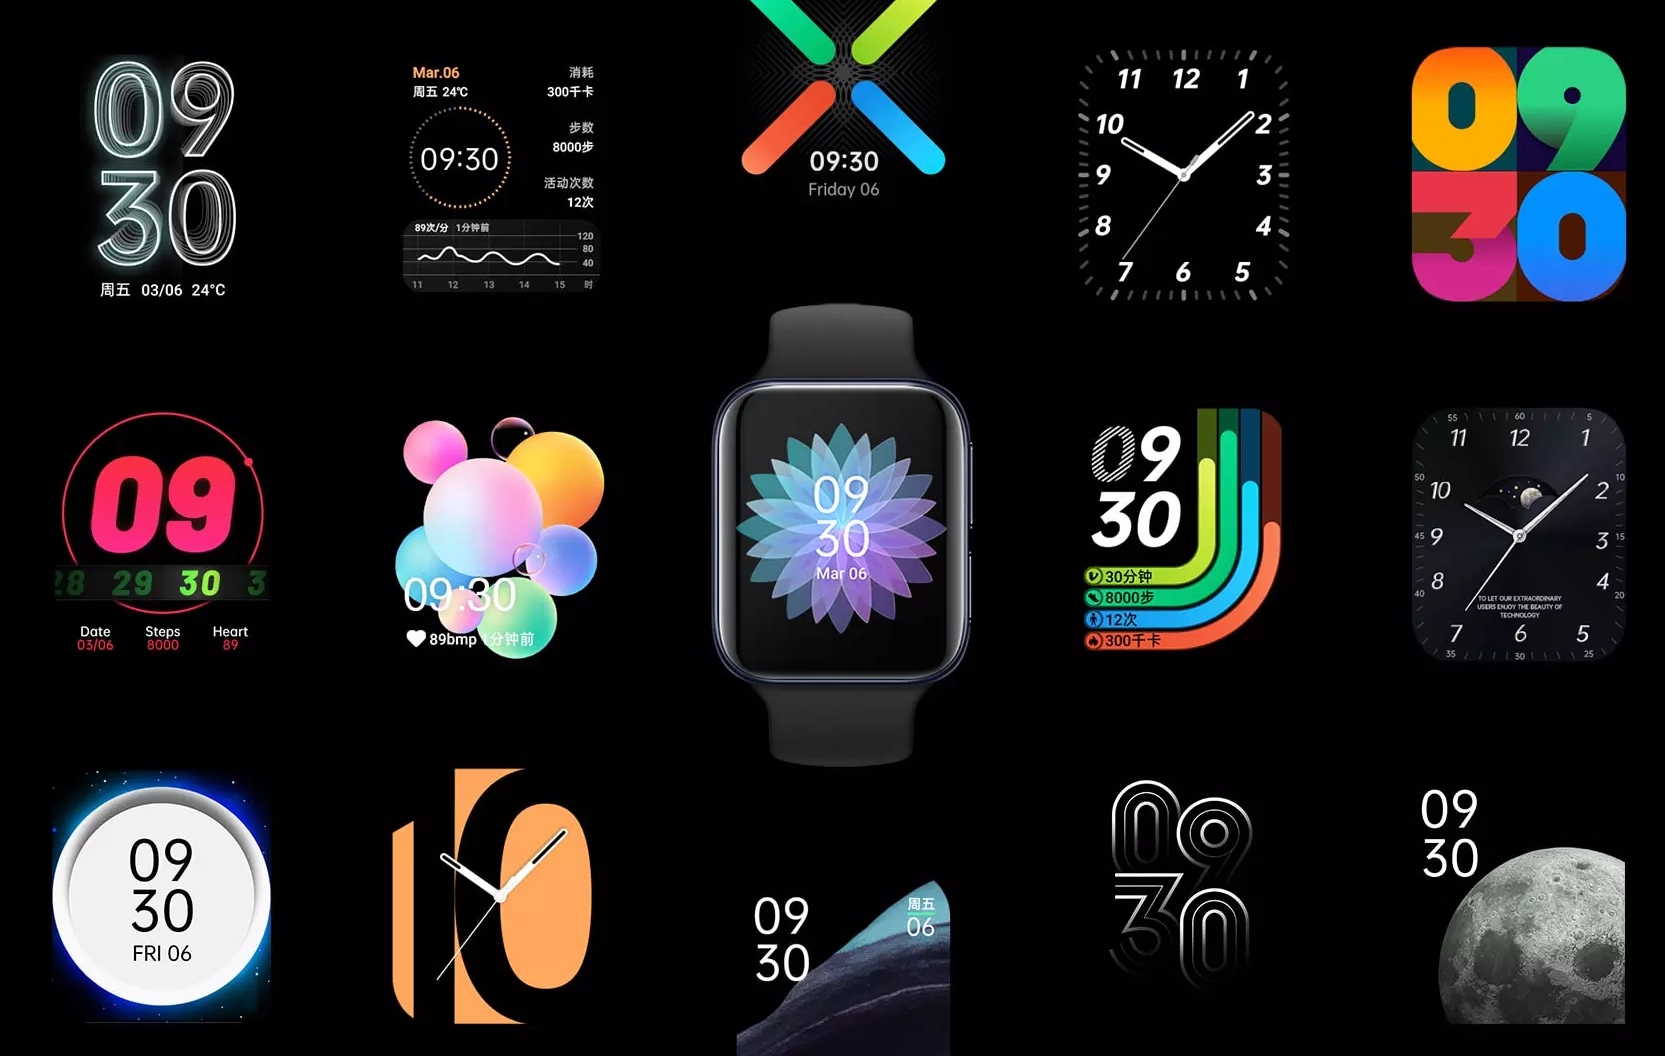 Oppo Watch faces